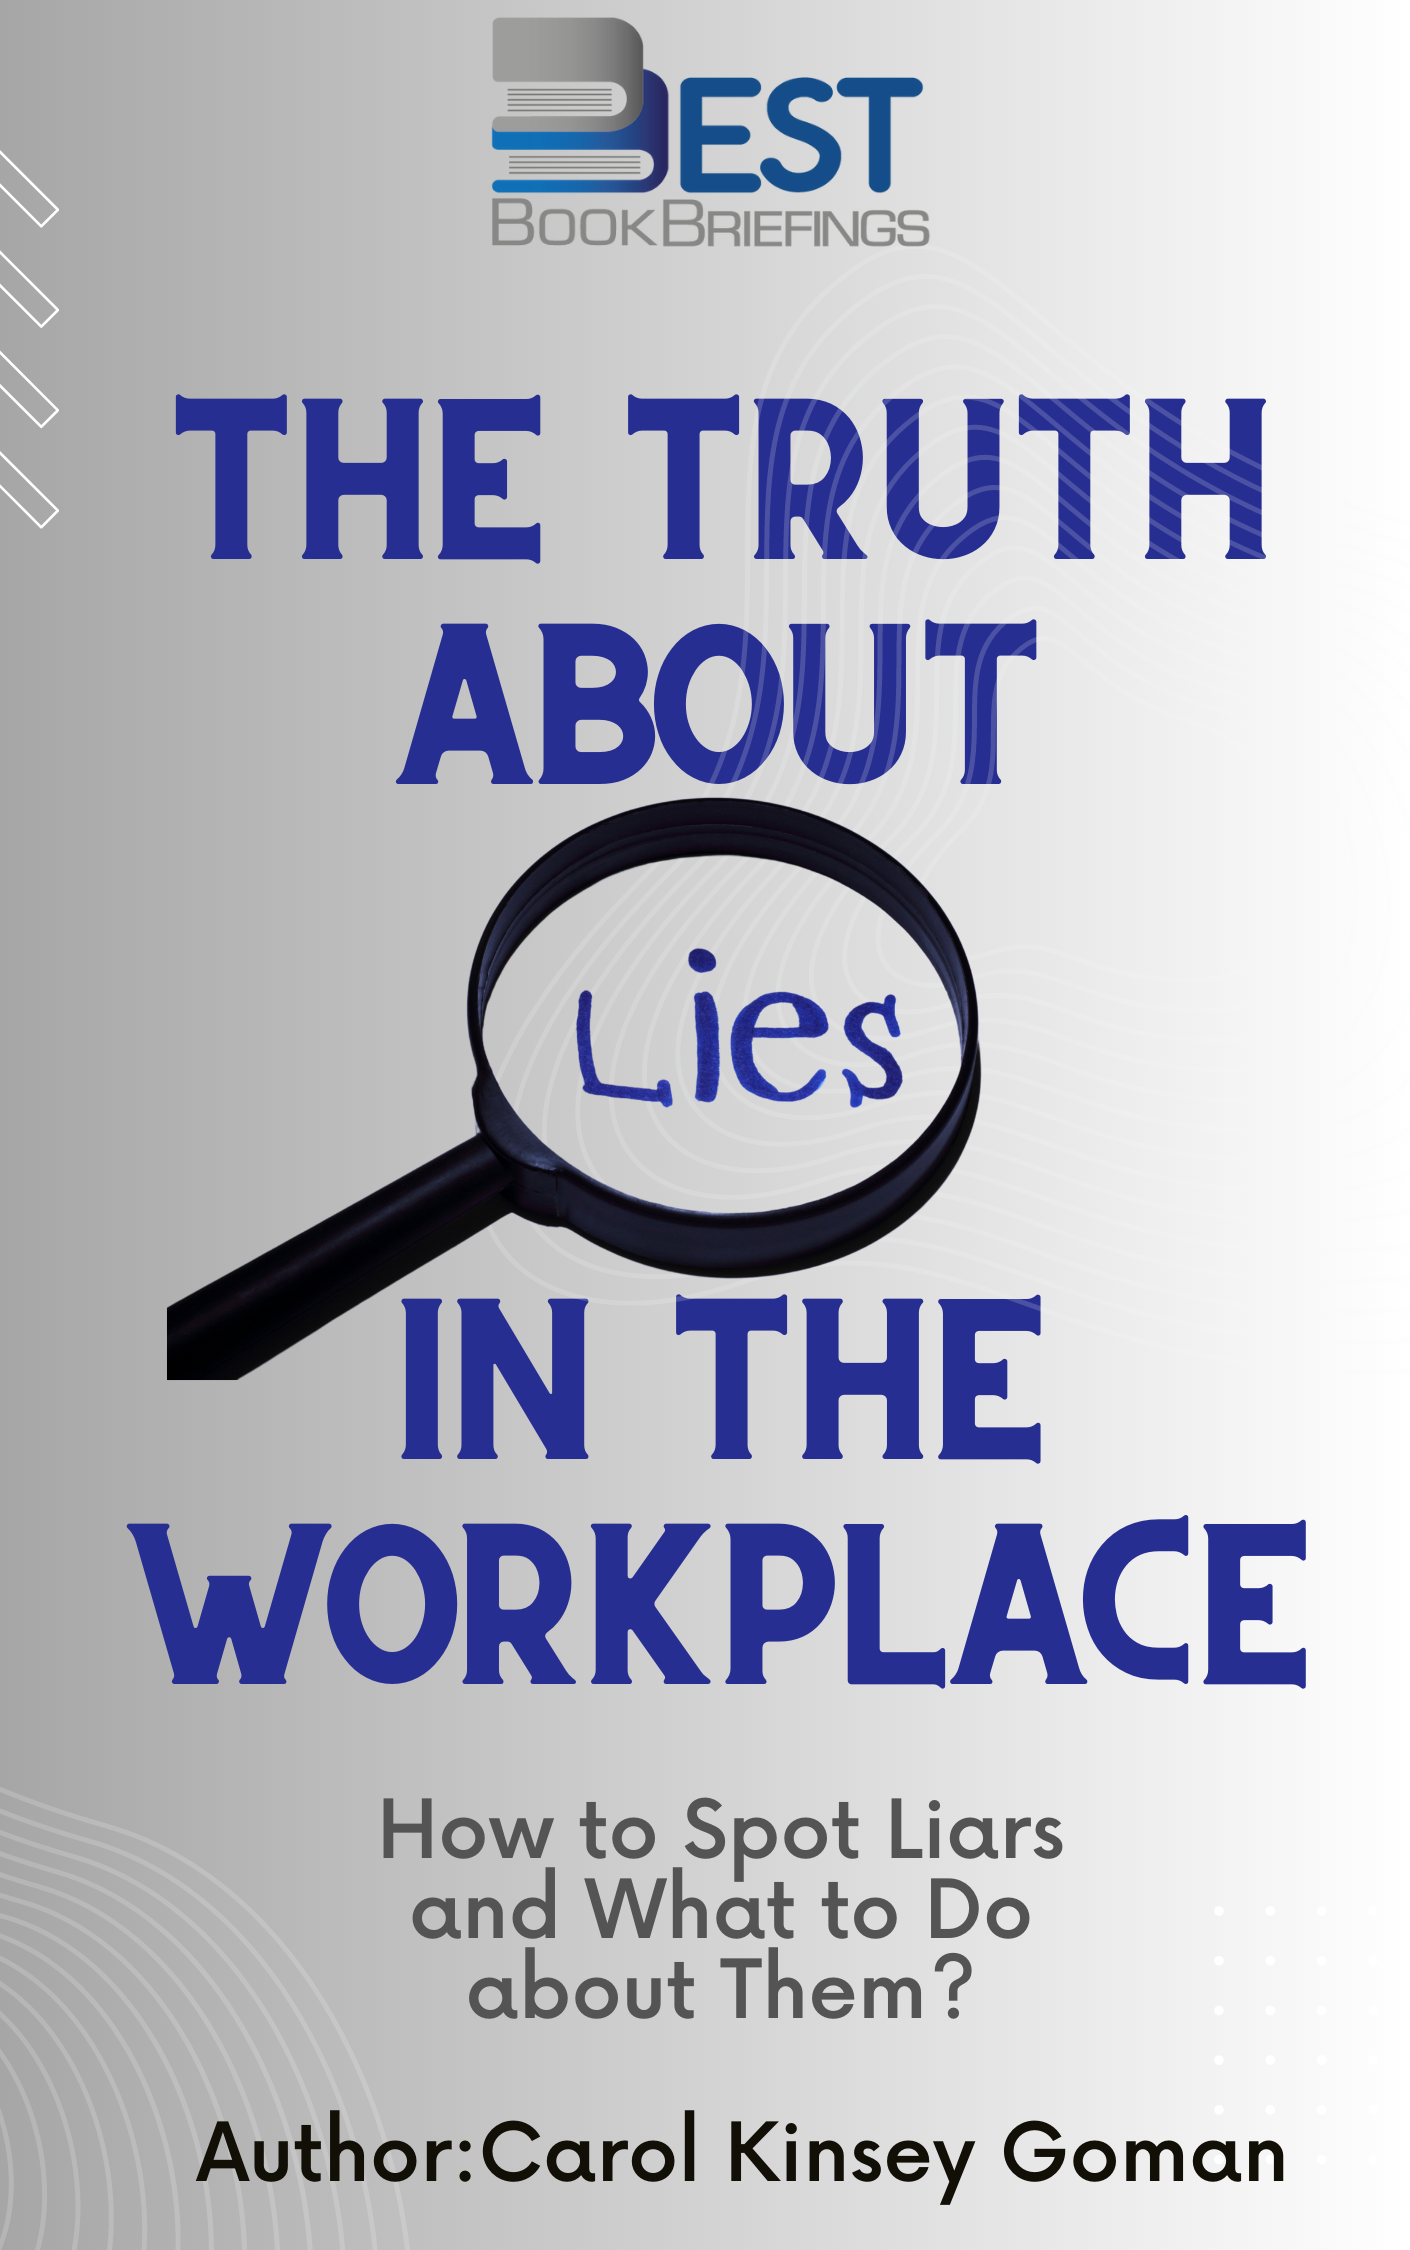 Sure, everyone tells little white lies now and then, but real deception in the workplace is a poison that can destroy relationships, careers, and companies. Carol Kinsey Goman, a leading workplace body language expert, combines her own experiences with the latest research to identify fifty subtle physical and vocal cues that 